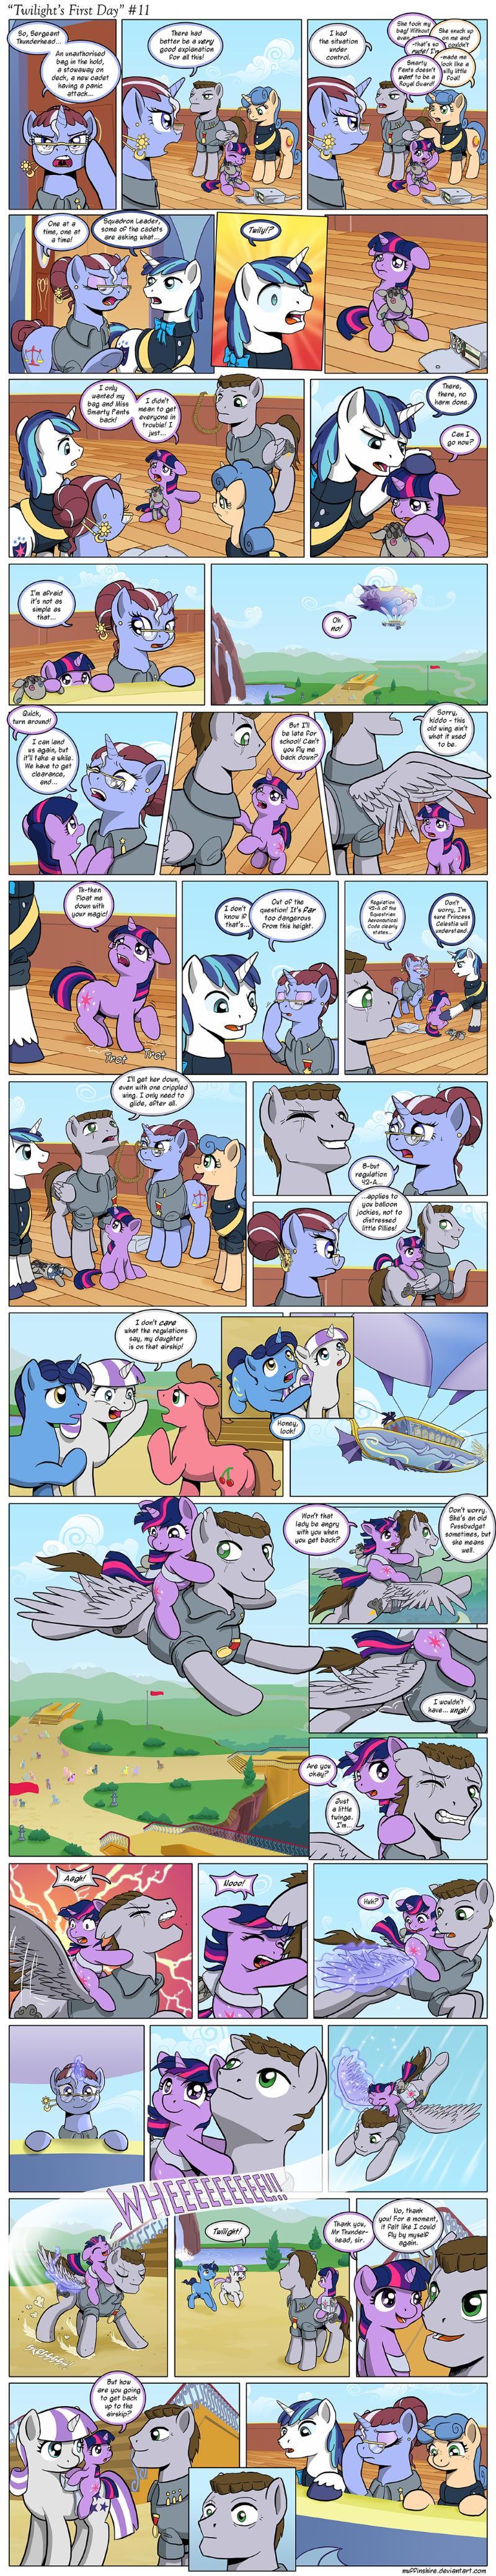 Page 11